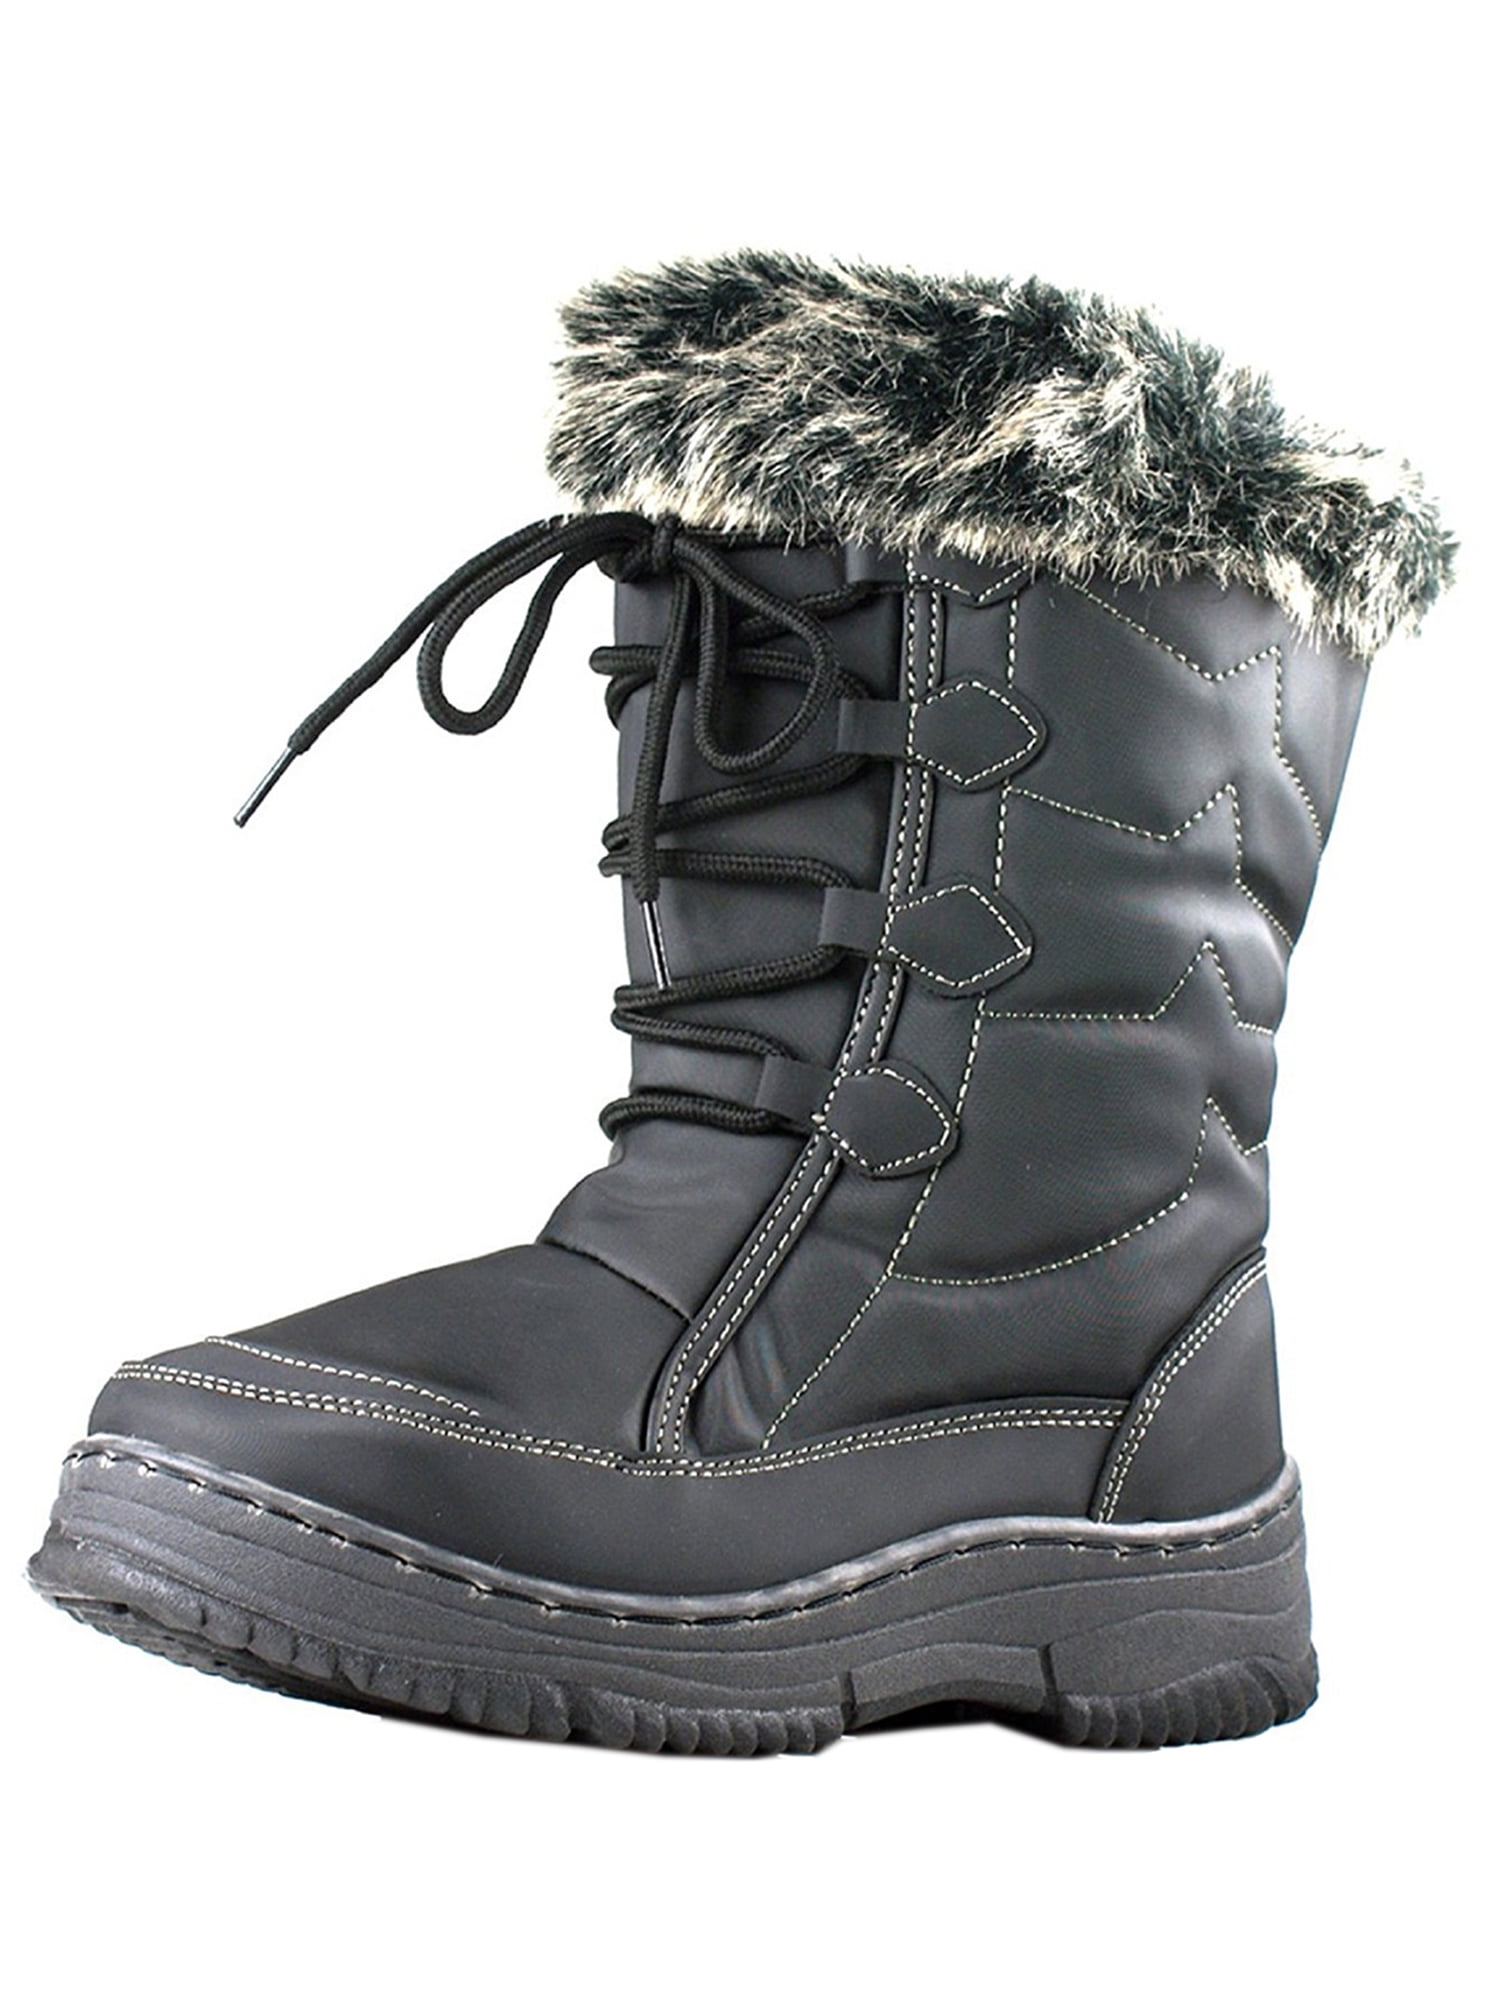 Winter Warm Snow Boots for Women Comfortable Faux Fur Lined Outdoor ...